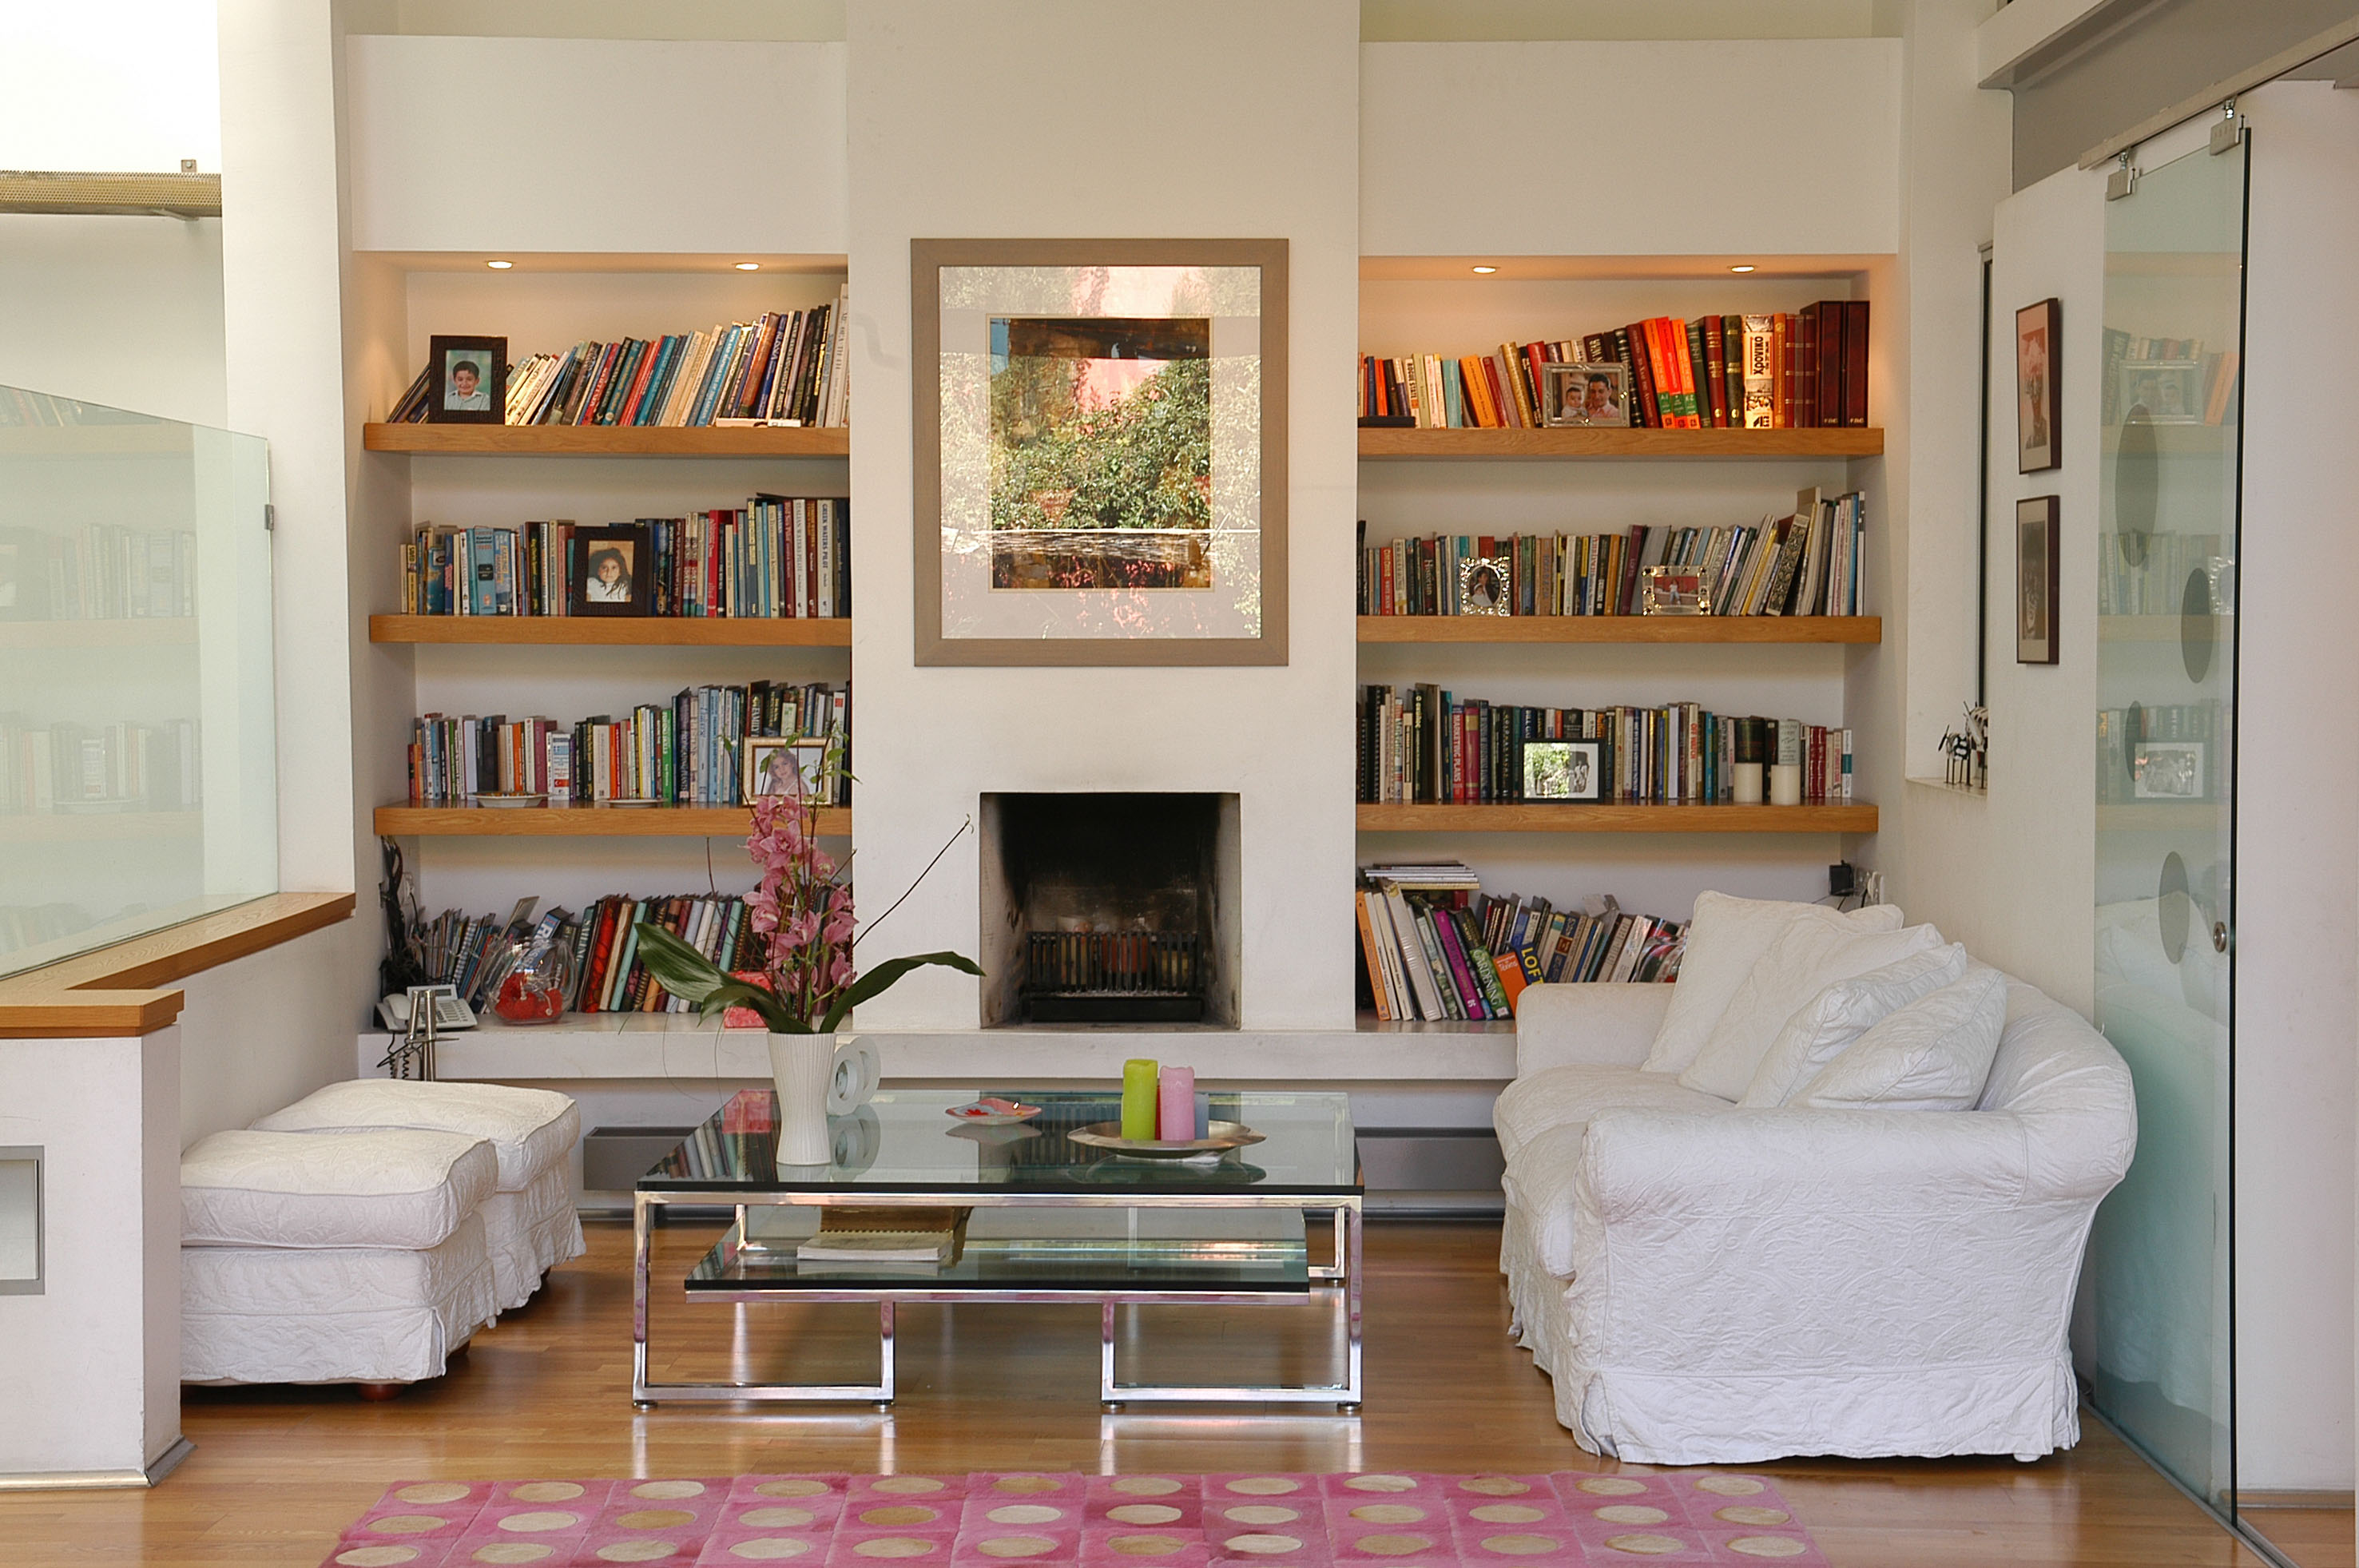 A live-work space - Fireplace - Library Area